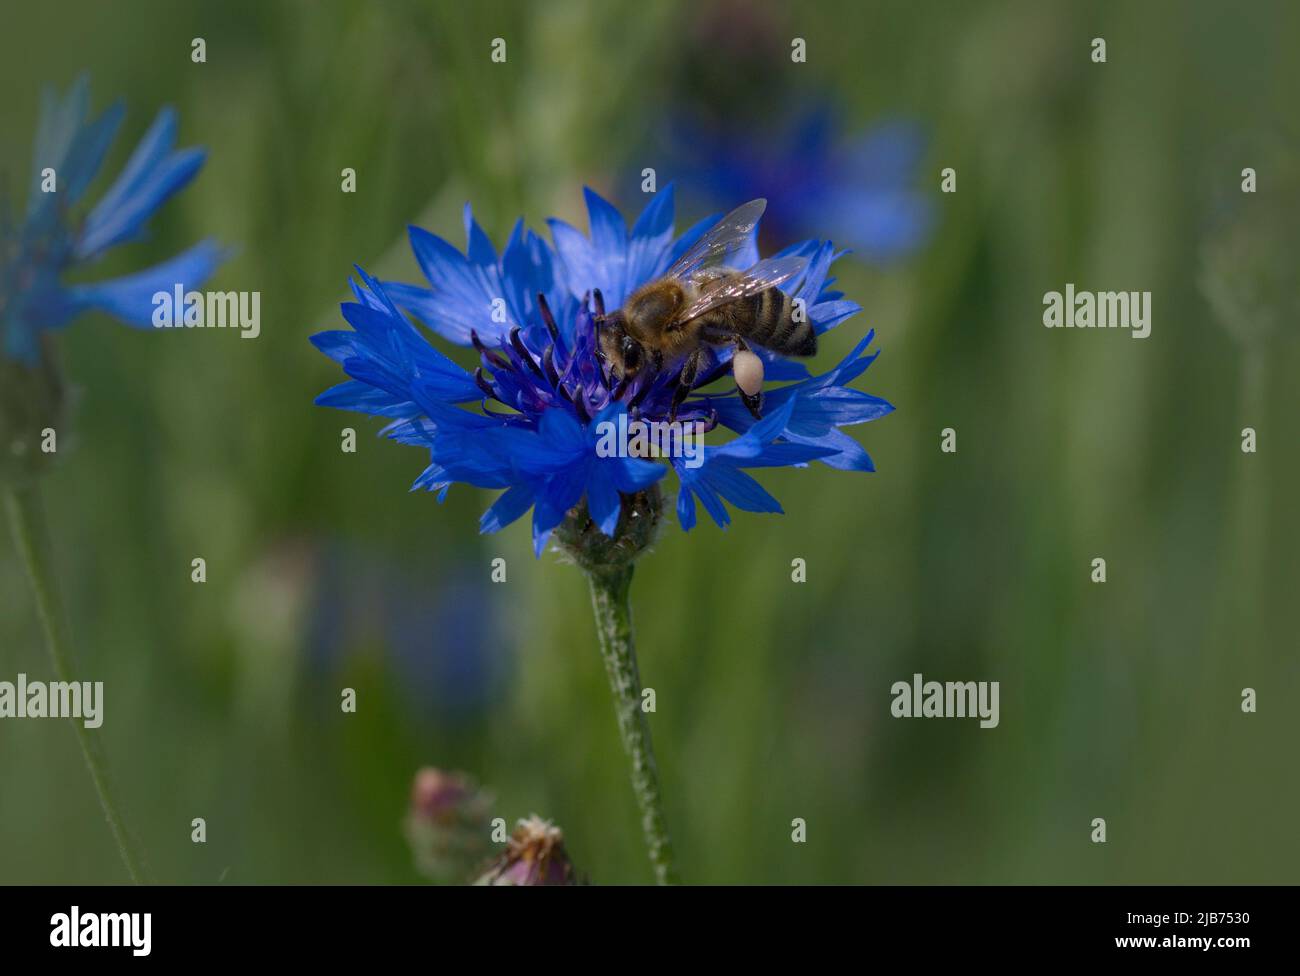 Macro photography of a honey bee on a blue corn flower in summer Stock Photo